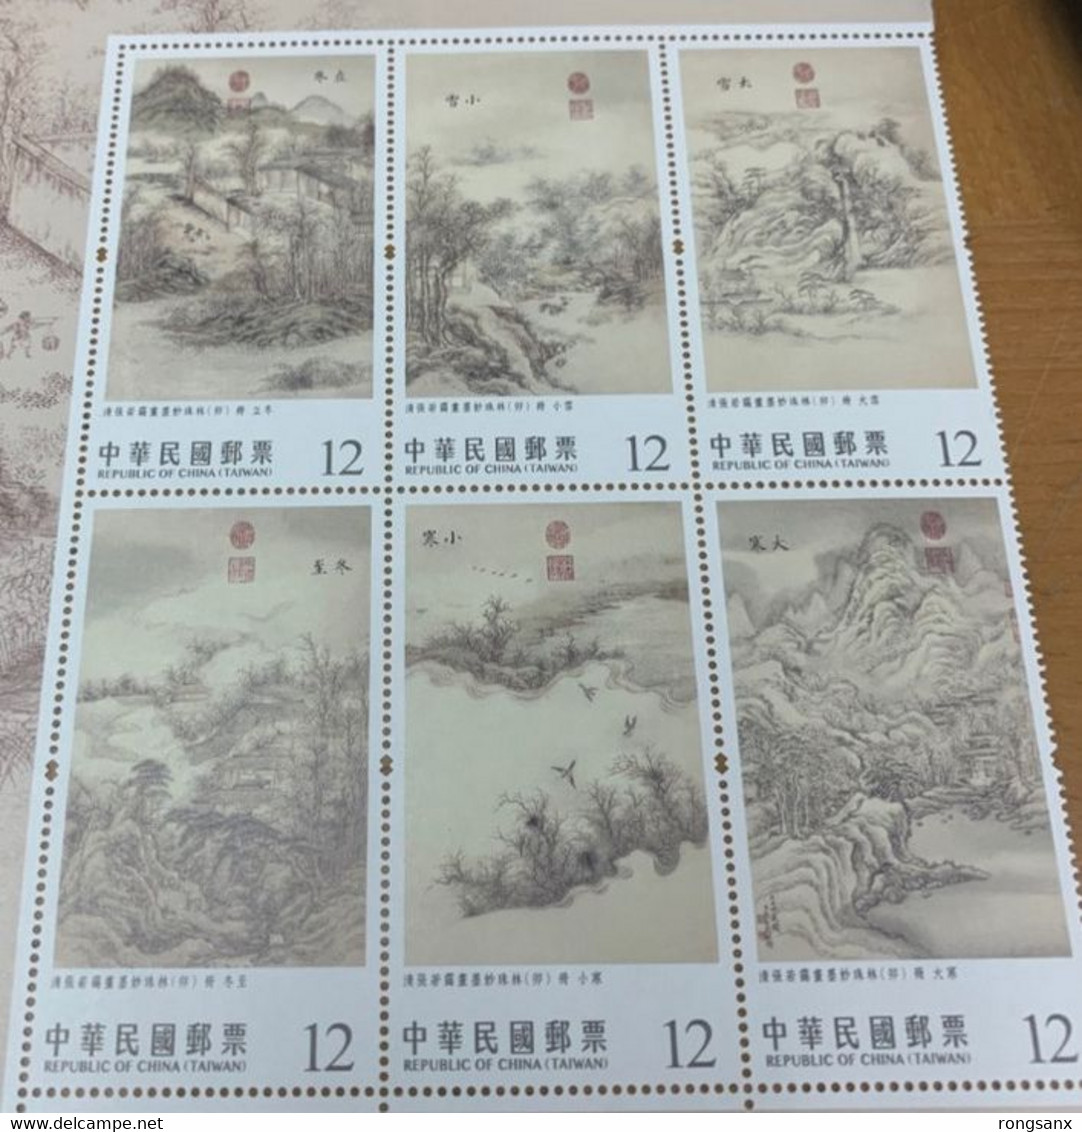 2022 TAIWAN 2022 CHINESE PAINTINGS 24 SOLAR TERMS (WINTER) BLK 6V STAMP - Lettres & Documents